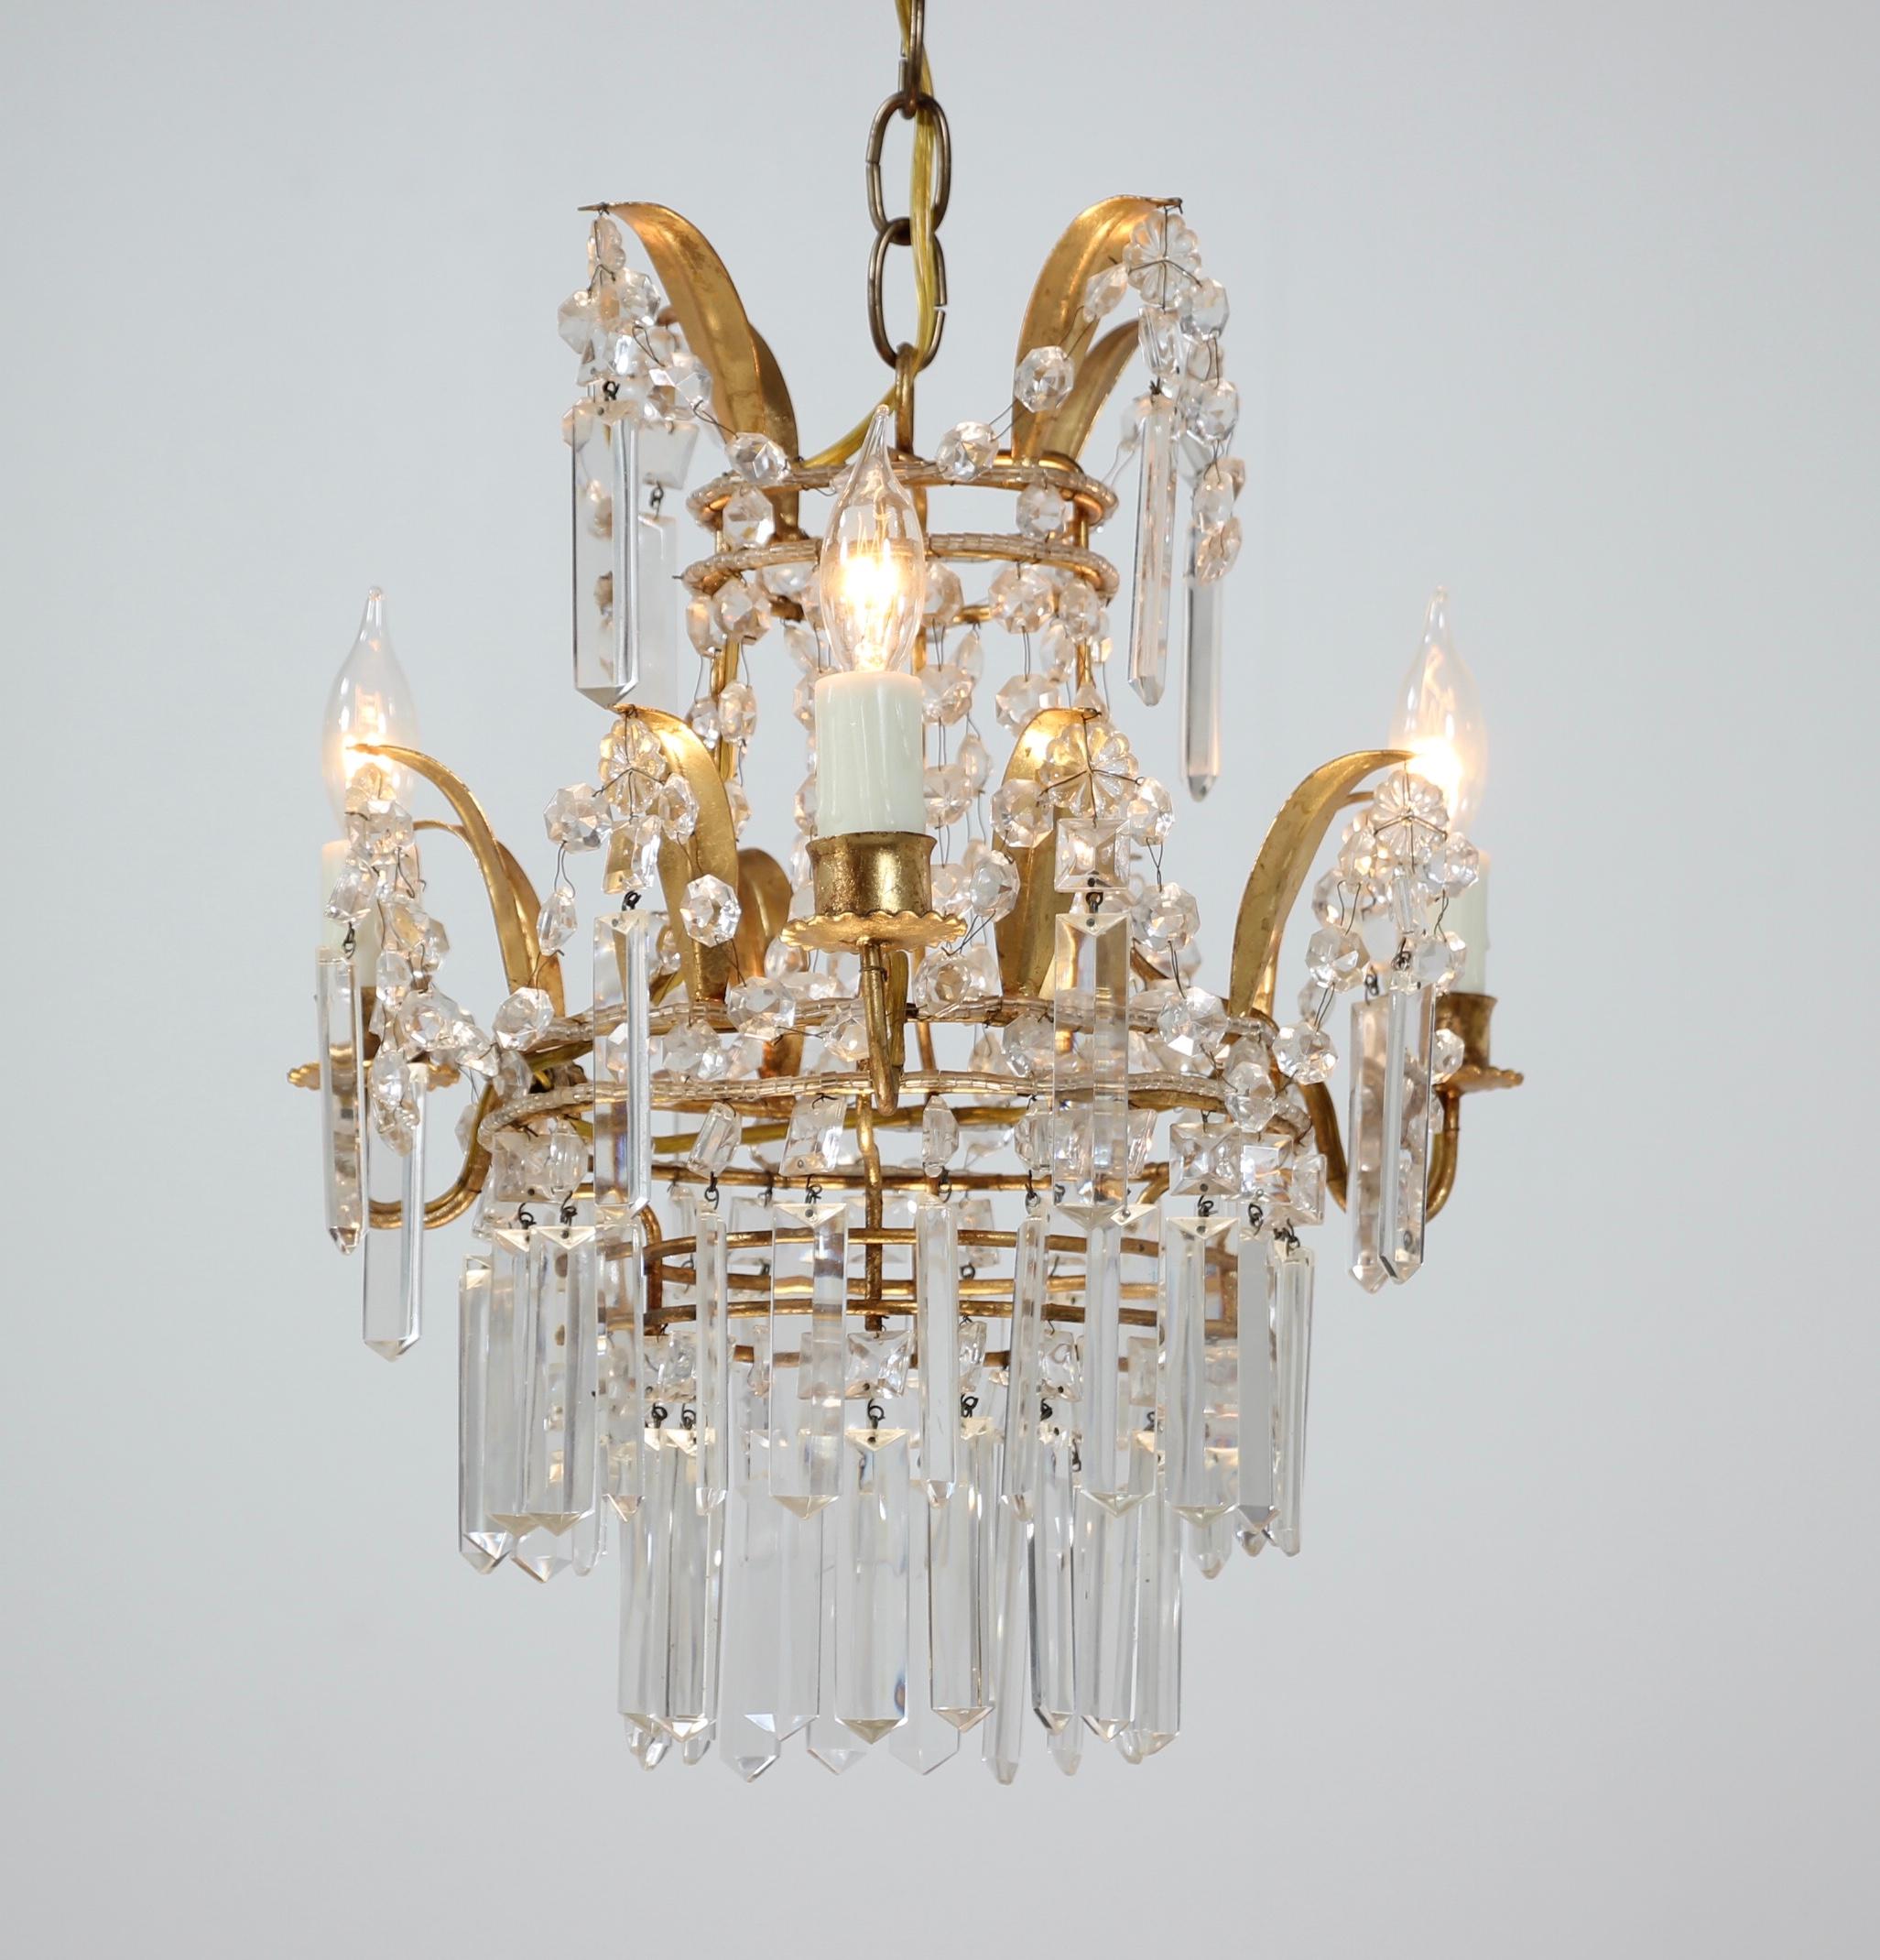 Sparkling, 1950s Italian gilt-iron and crystal beaded chandelier. 

The chandelier consists of a delicately shaped gilded iron frame which has been hand beaded and decorated with crystal prisms. The chandelier requires 3 candelabra base bulbs